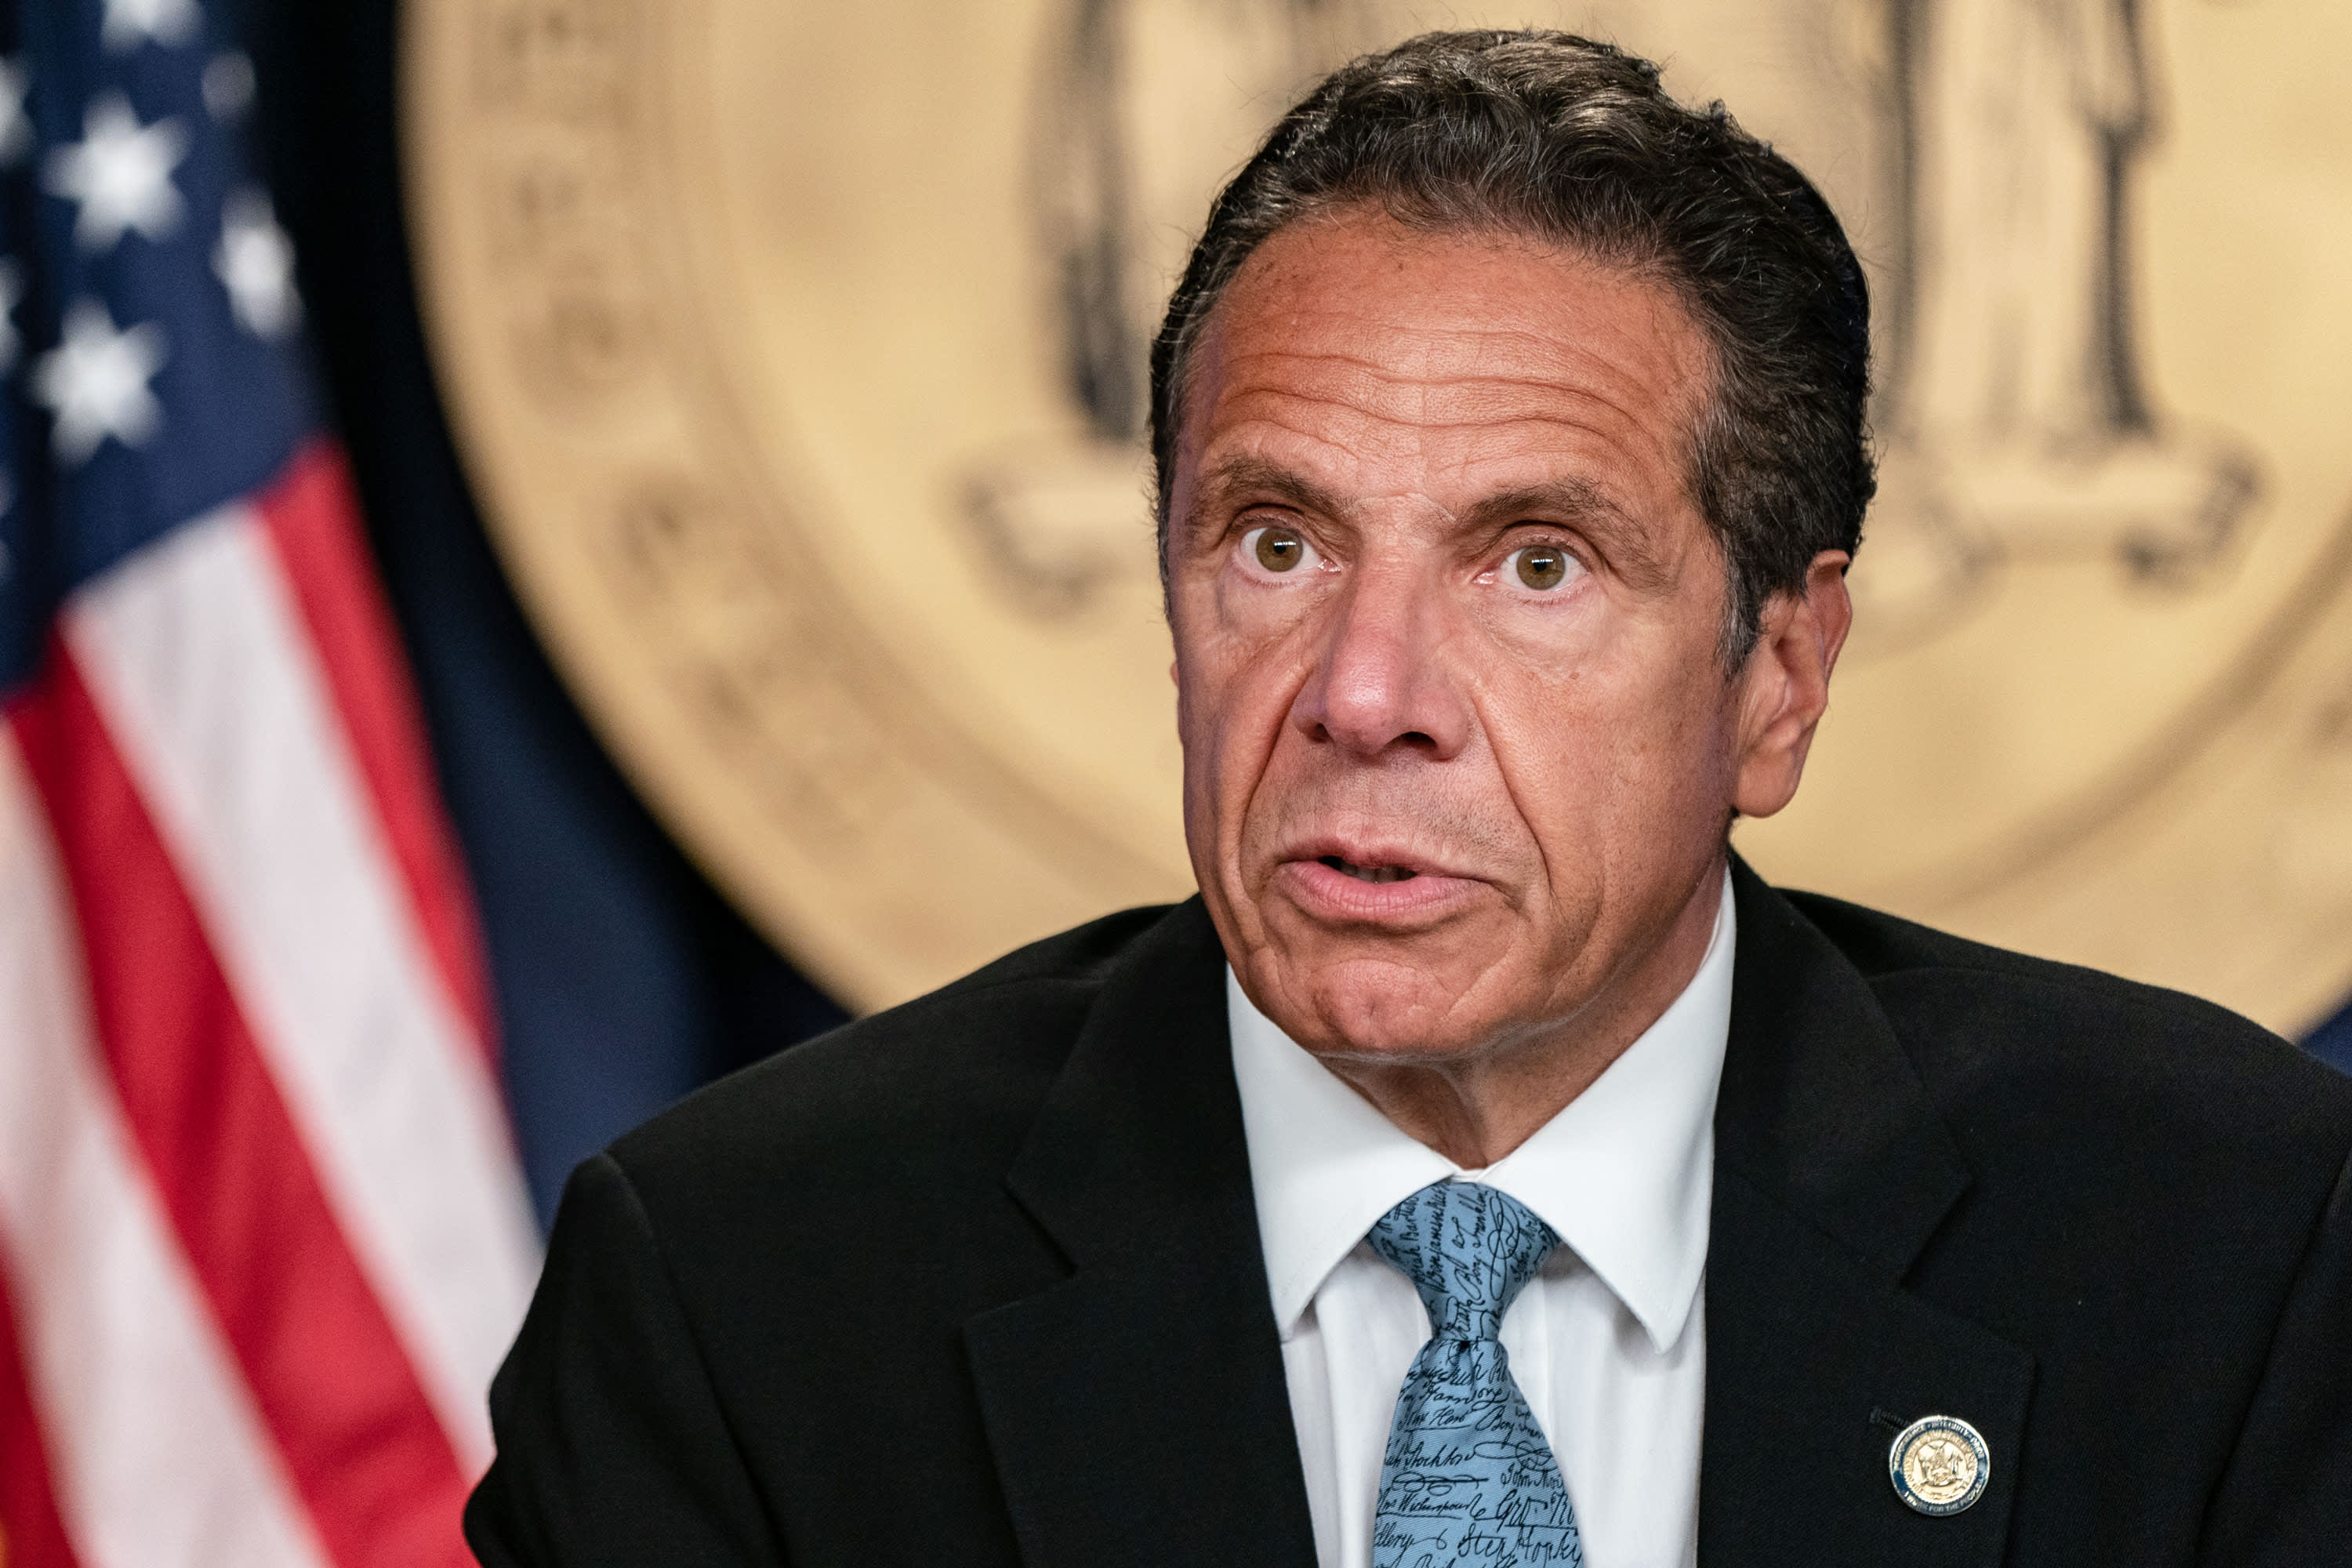 Cuomo’s government ‘accidental sexism’ hinders equality for all, says author